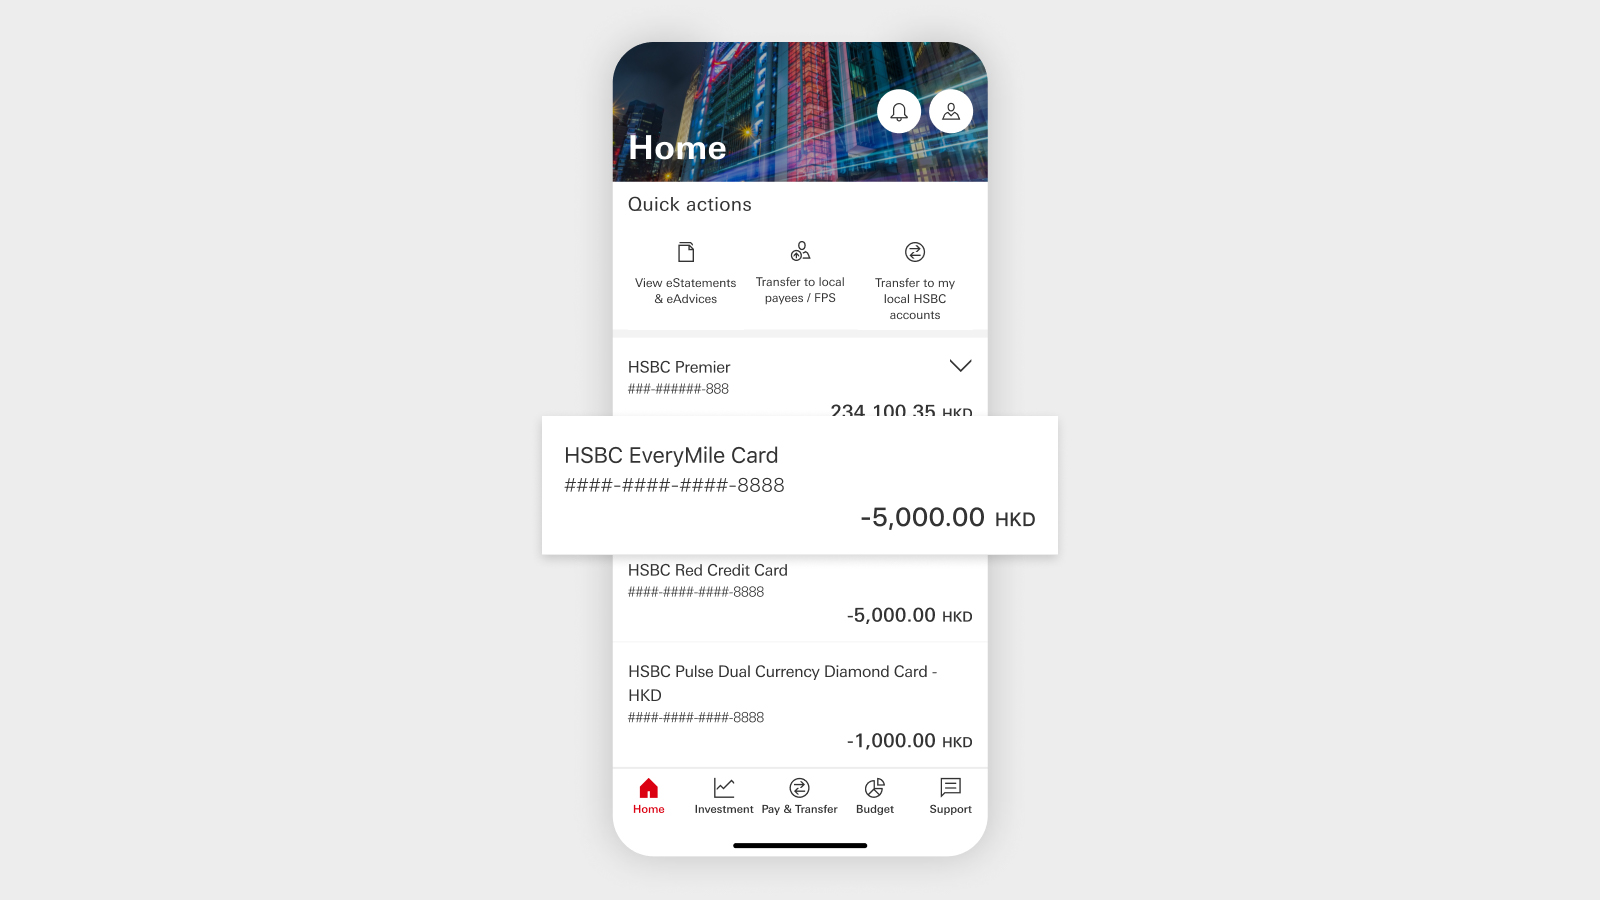 HSBC HK App screen with a credit card highlighted.